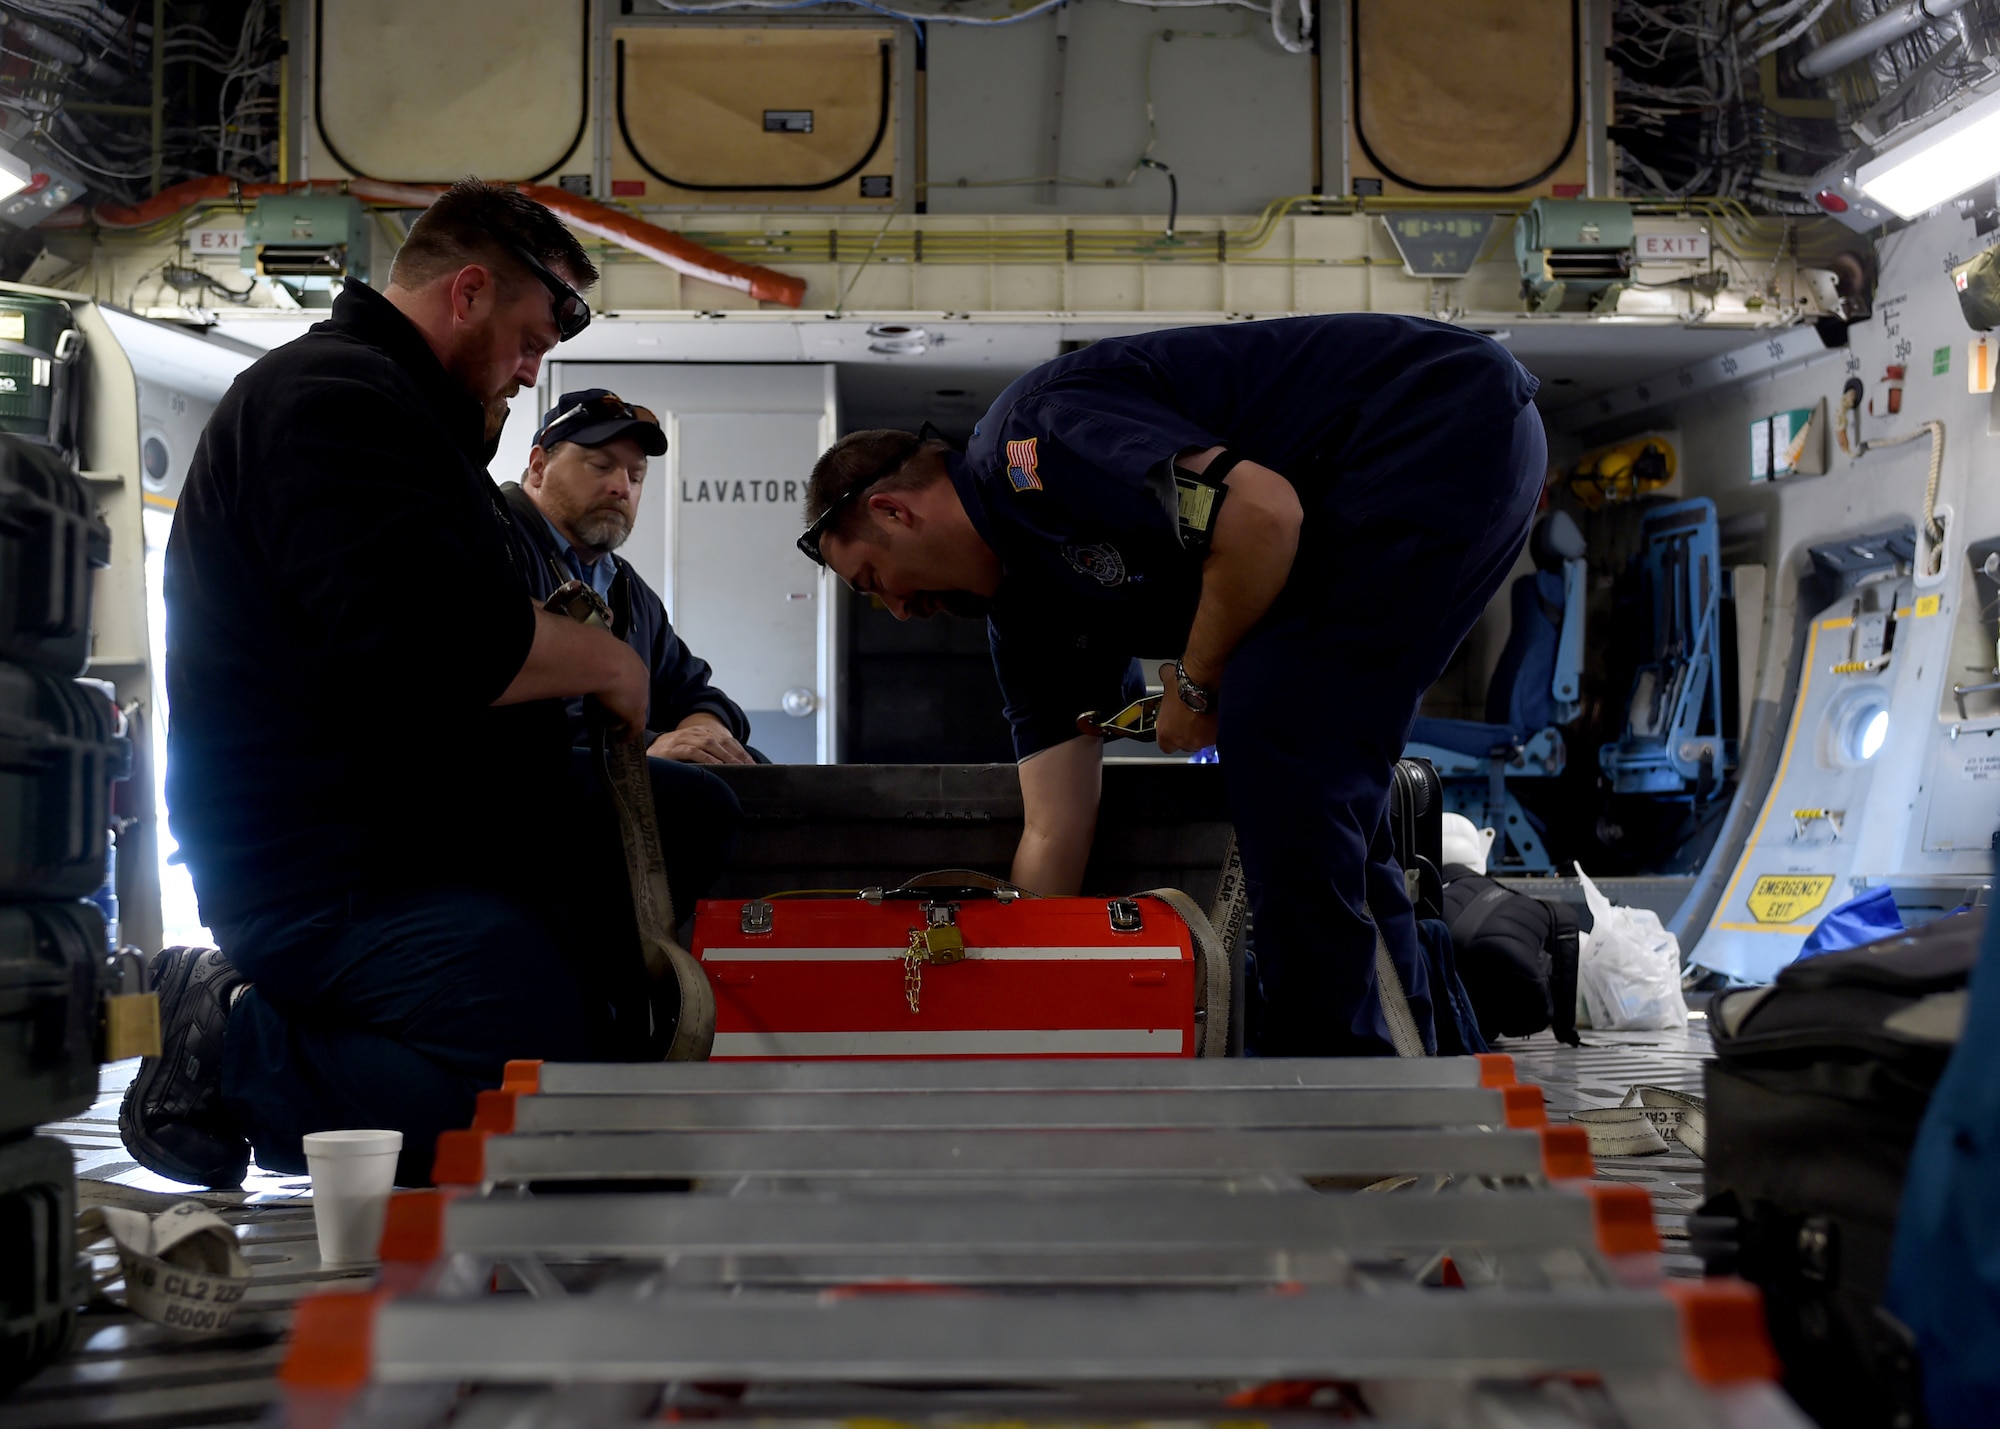 Maintainers from the 97th Maintenance Directorate, load tool boxes onto a U.S. Air Force C-17 Globemaster III cargo aircraft from the 58th Airlift Squadron, Jan. 29, 2016 at Altus Air Force Base, Okla. The C-17 and its crew prepared for a weekend trip to participate in the 2016 Ilopango Airshow in San Salvador, El Salvador from Jan. 30 - 31. (U.S. Air Force photo by Senior Airman Franklin R. Ramos/Released)